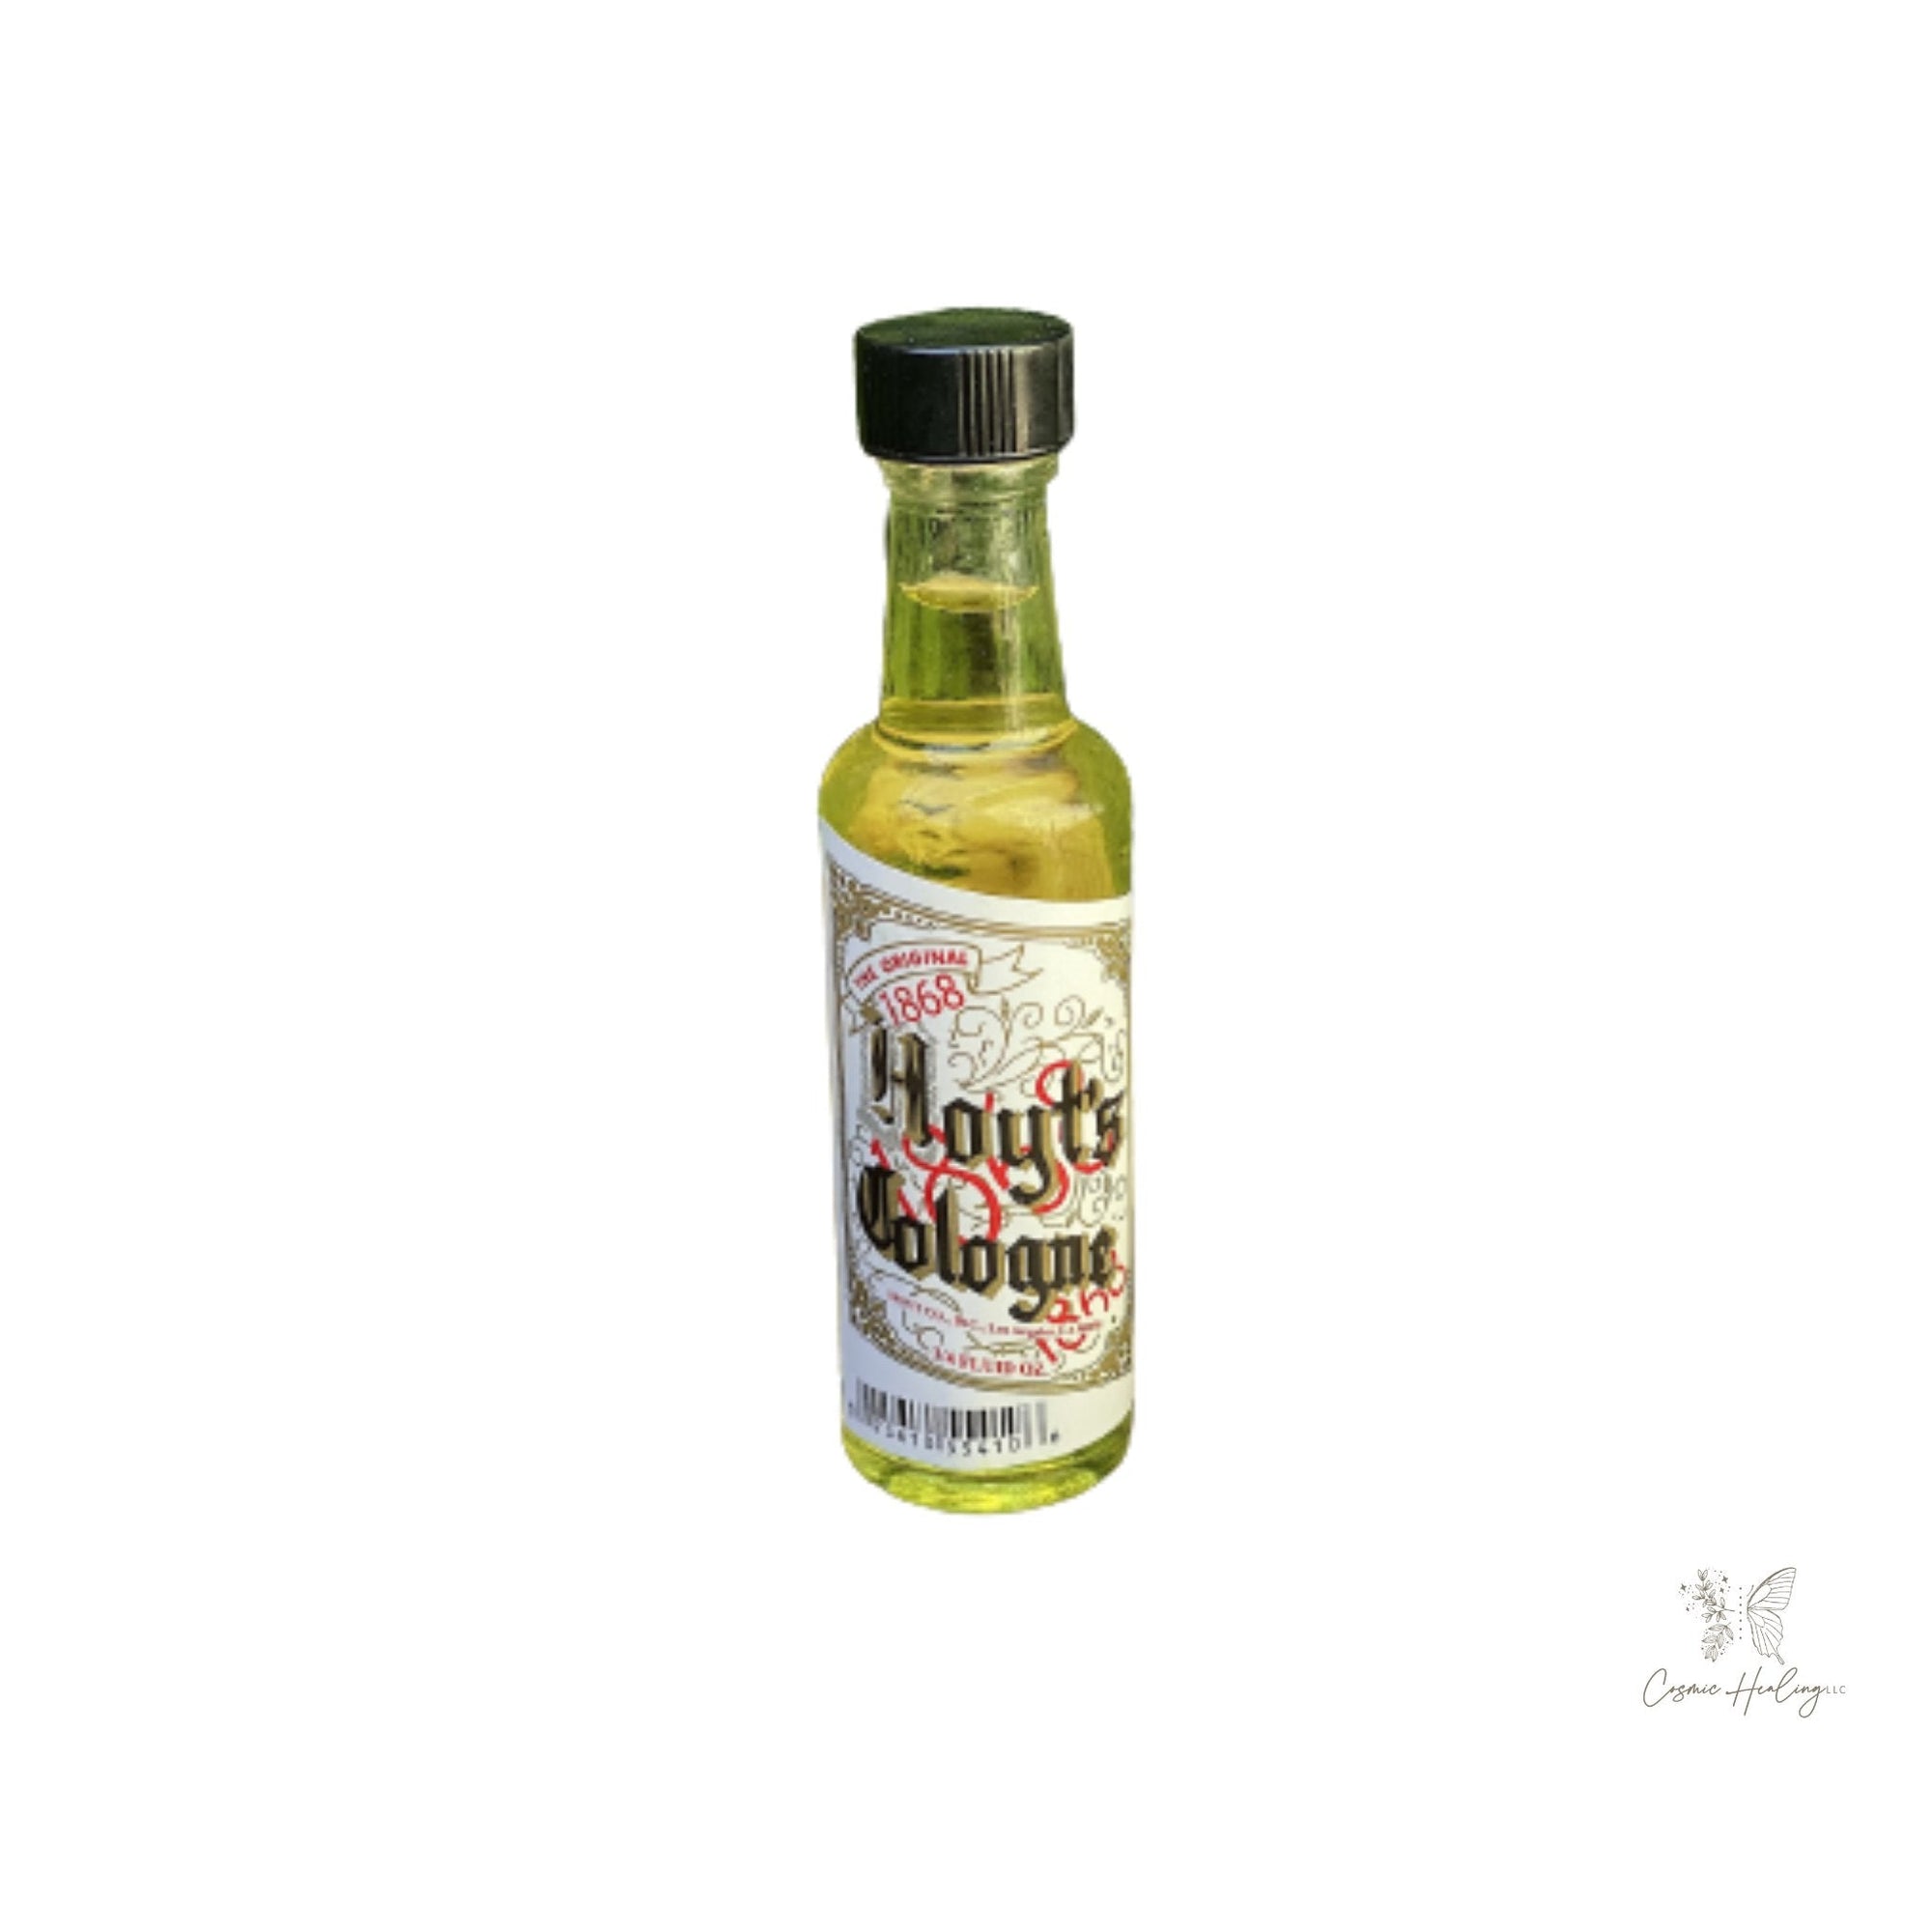 Hoyt's Cologne (Colonia de Hoyt's) 3/4 oz Anointing & Conjure Oil lucky rub for gamblers - Shop Cosmic Healing